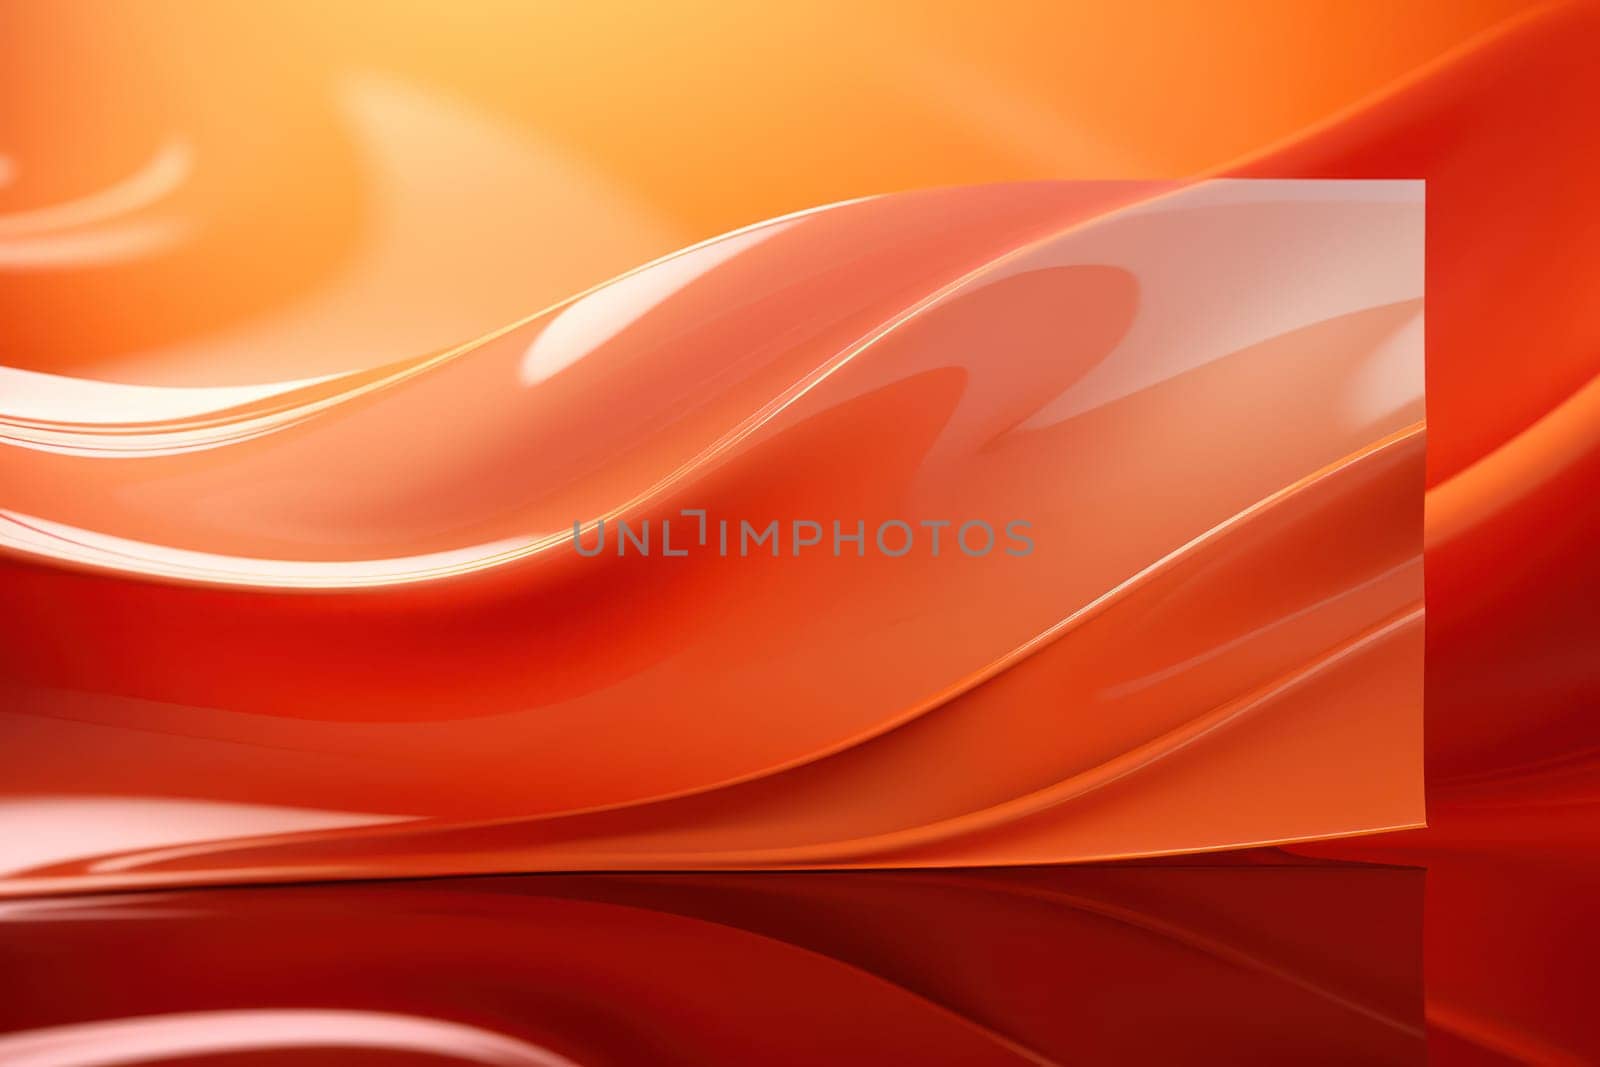 Shiny Wave of Liquid Light: Abstract Background Design with Orange and Yellow Gradient Curve.